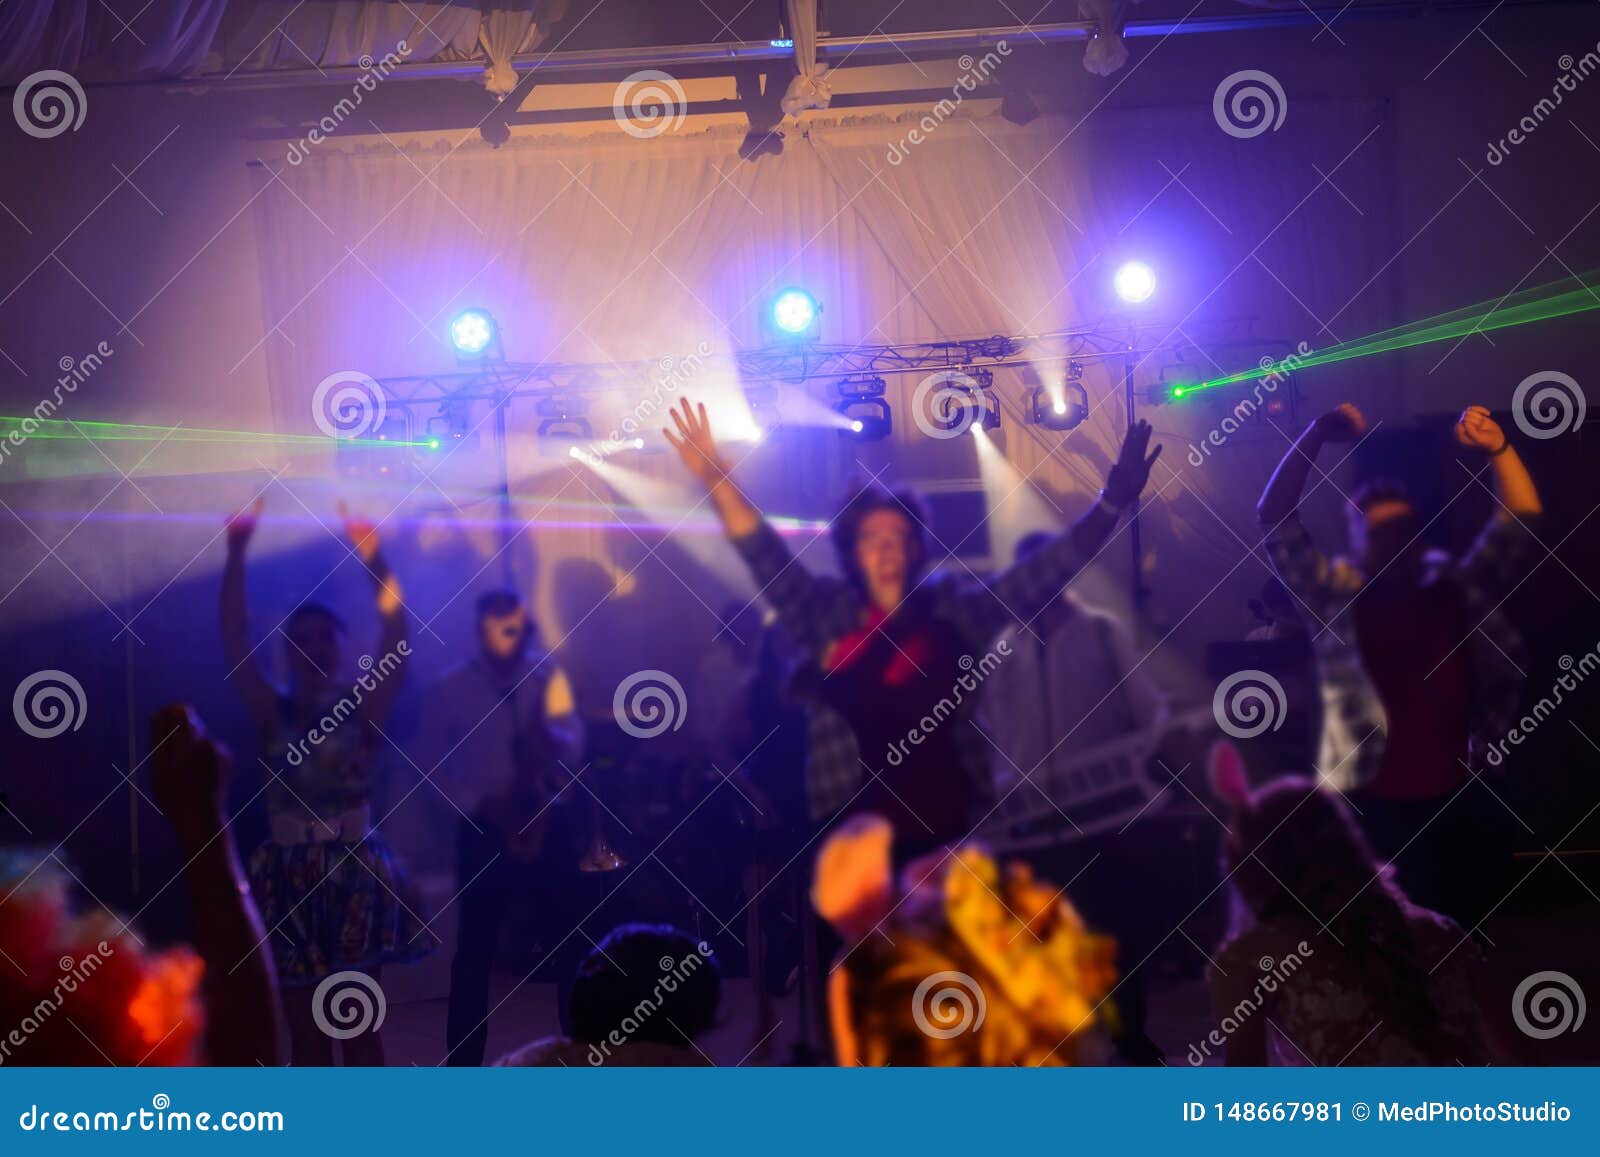 The Party, Dancing on the Floor Editorial Photo - Image of crowd ...